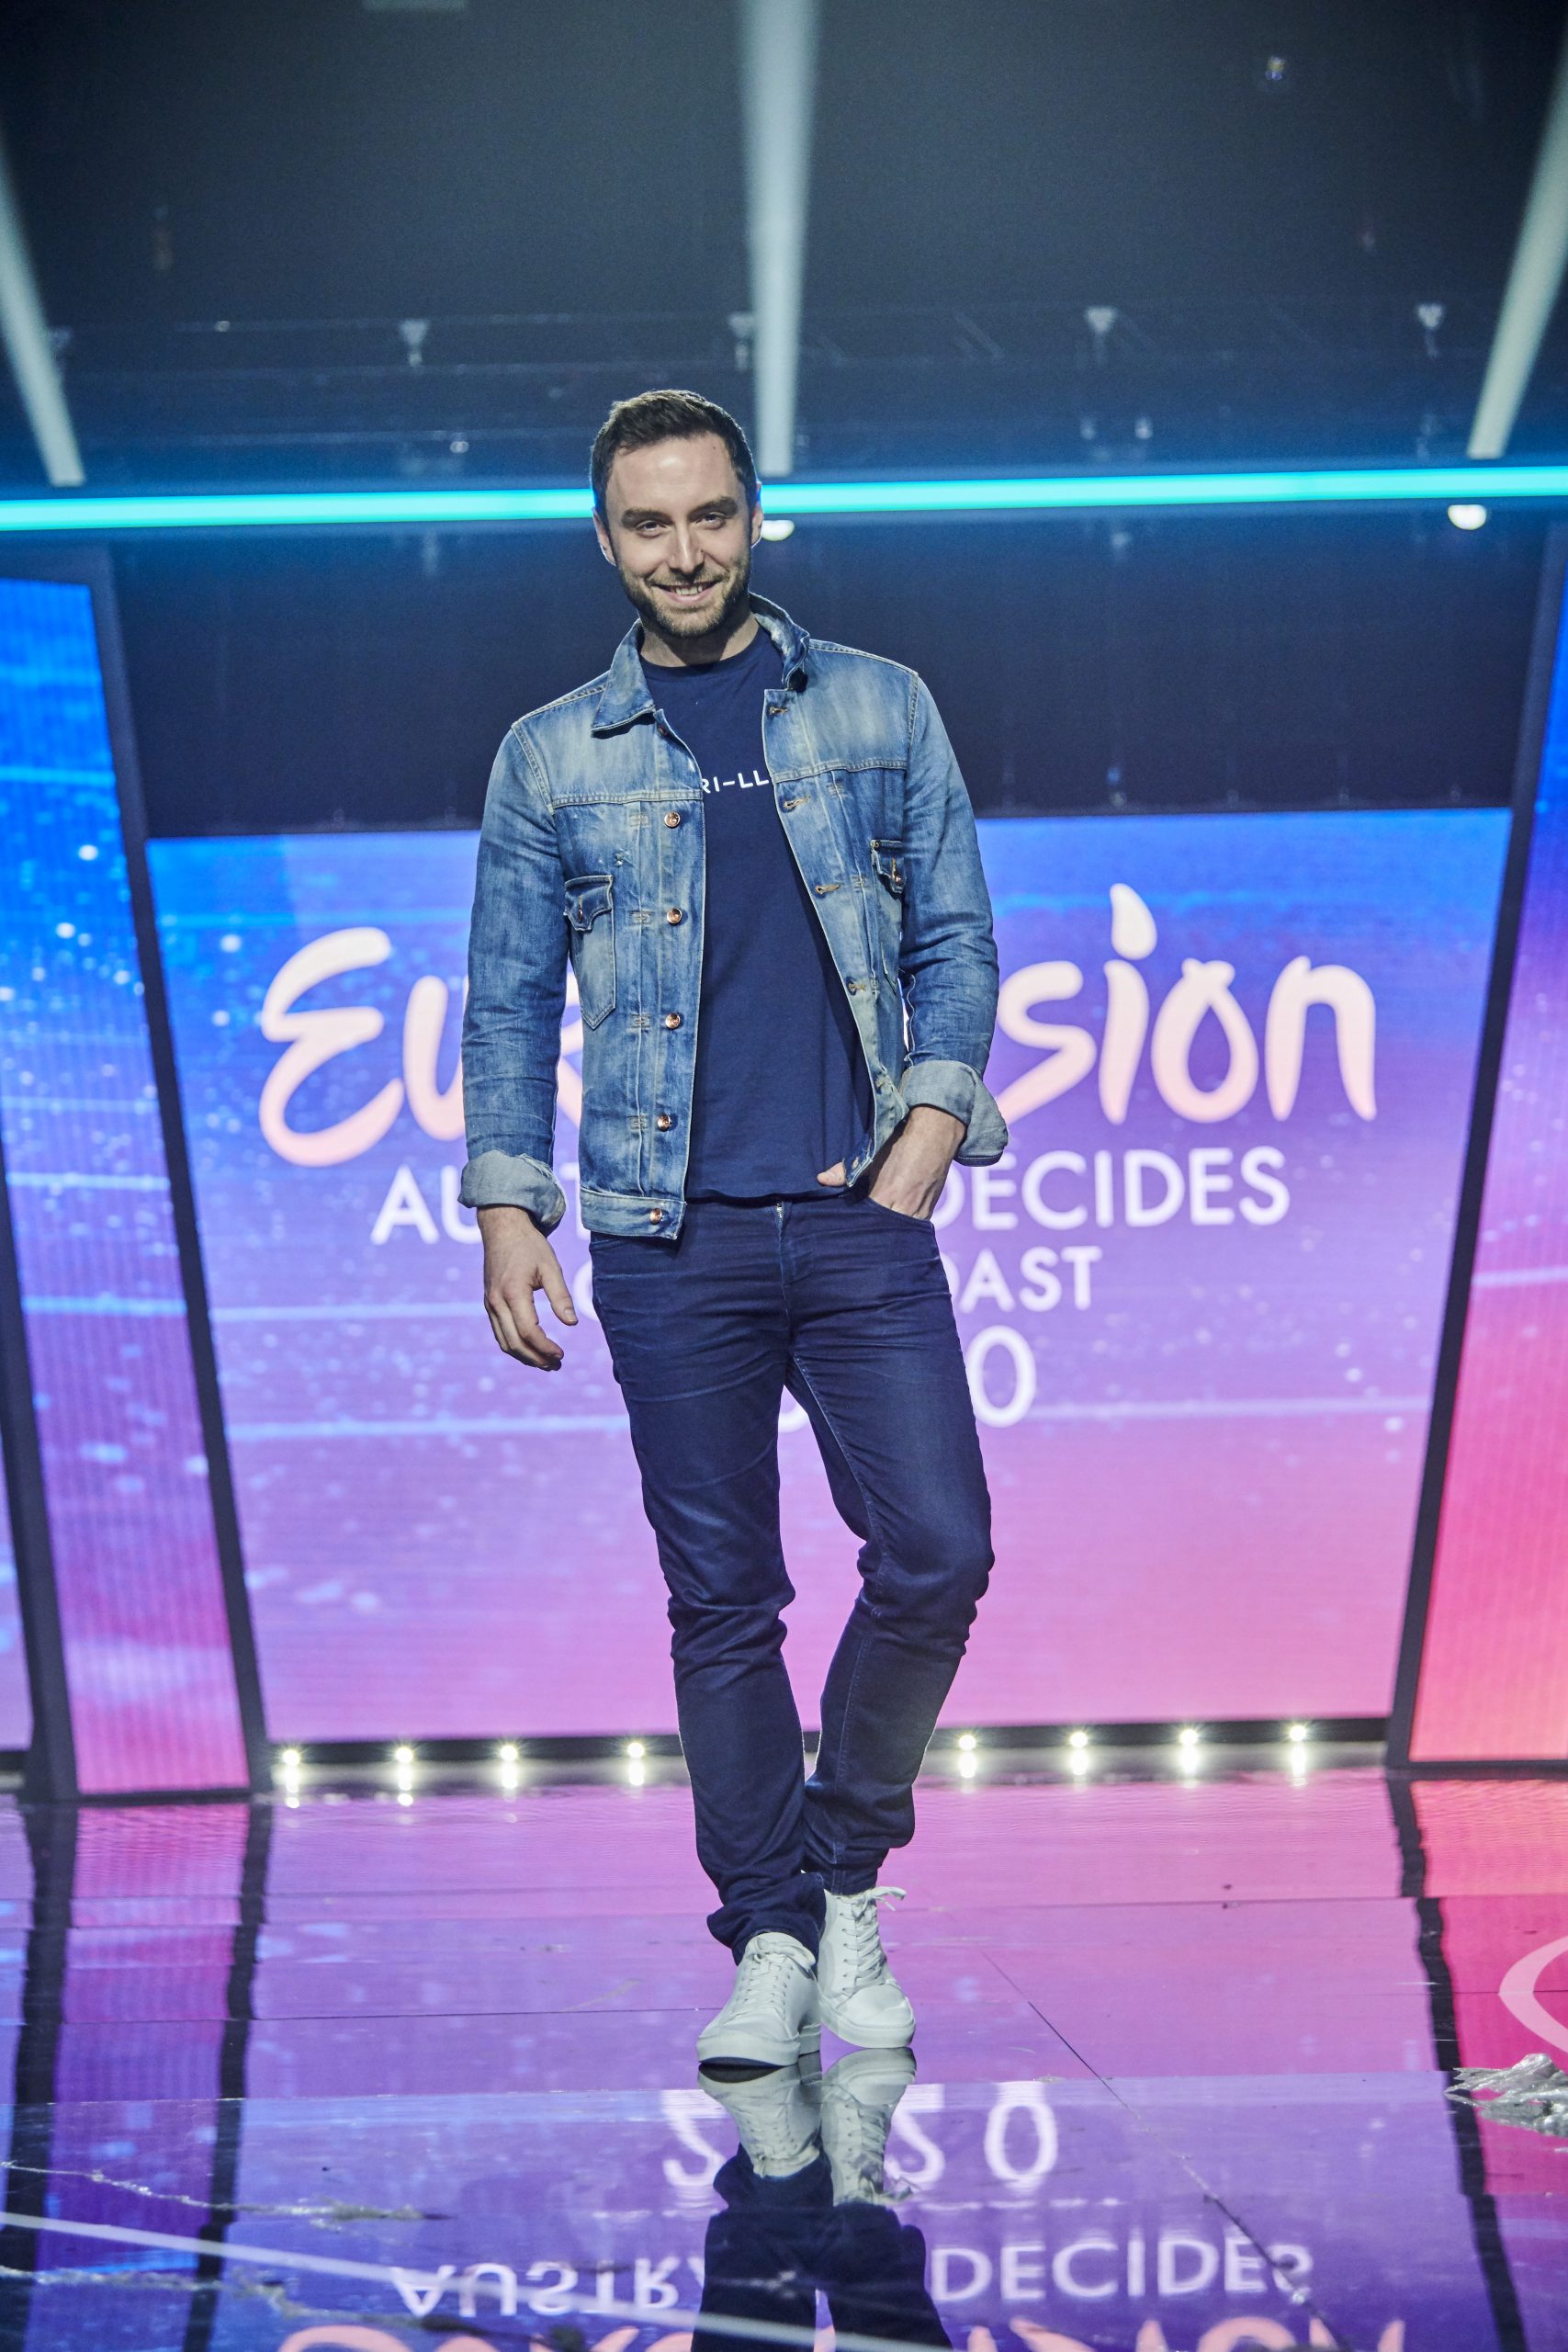 Counting down to Eurovision – Australia Decides with Måns Zelmerlöw